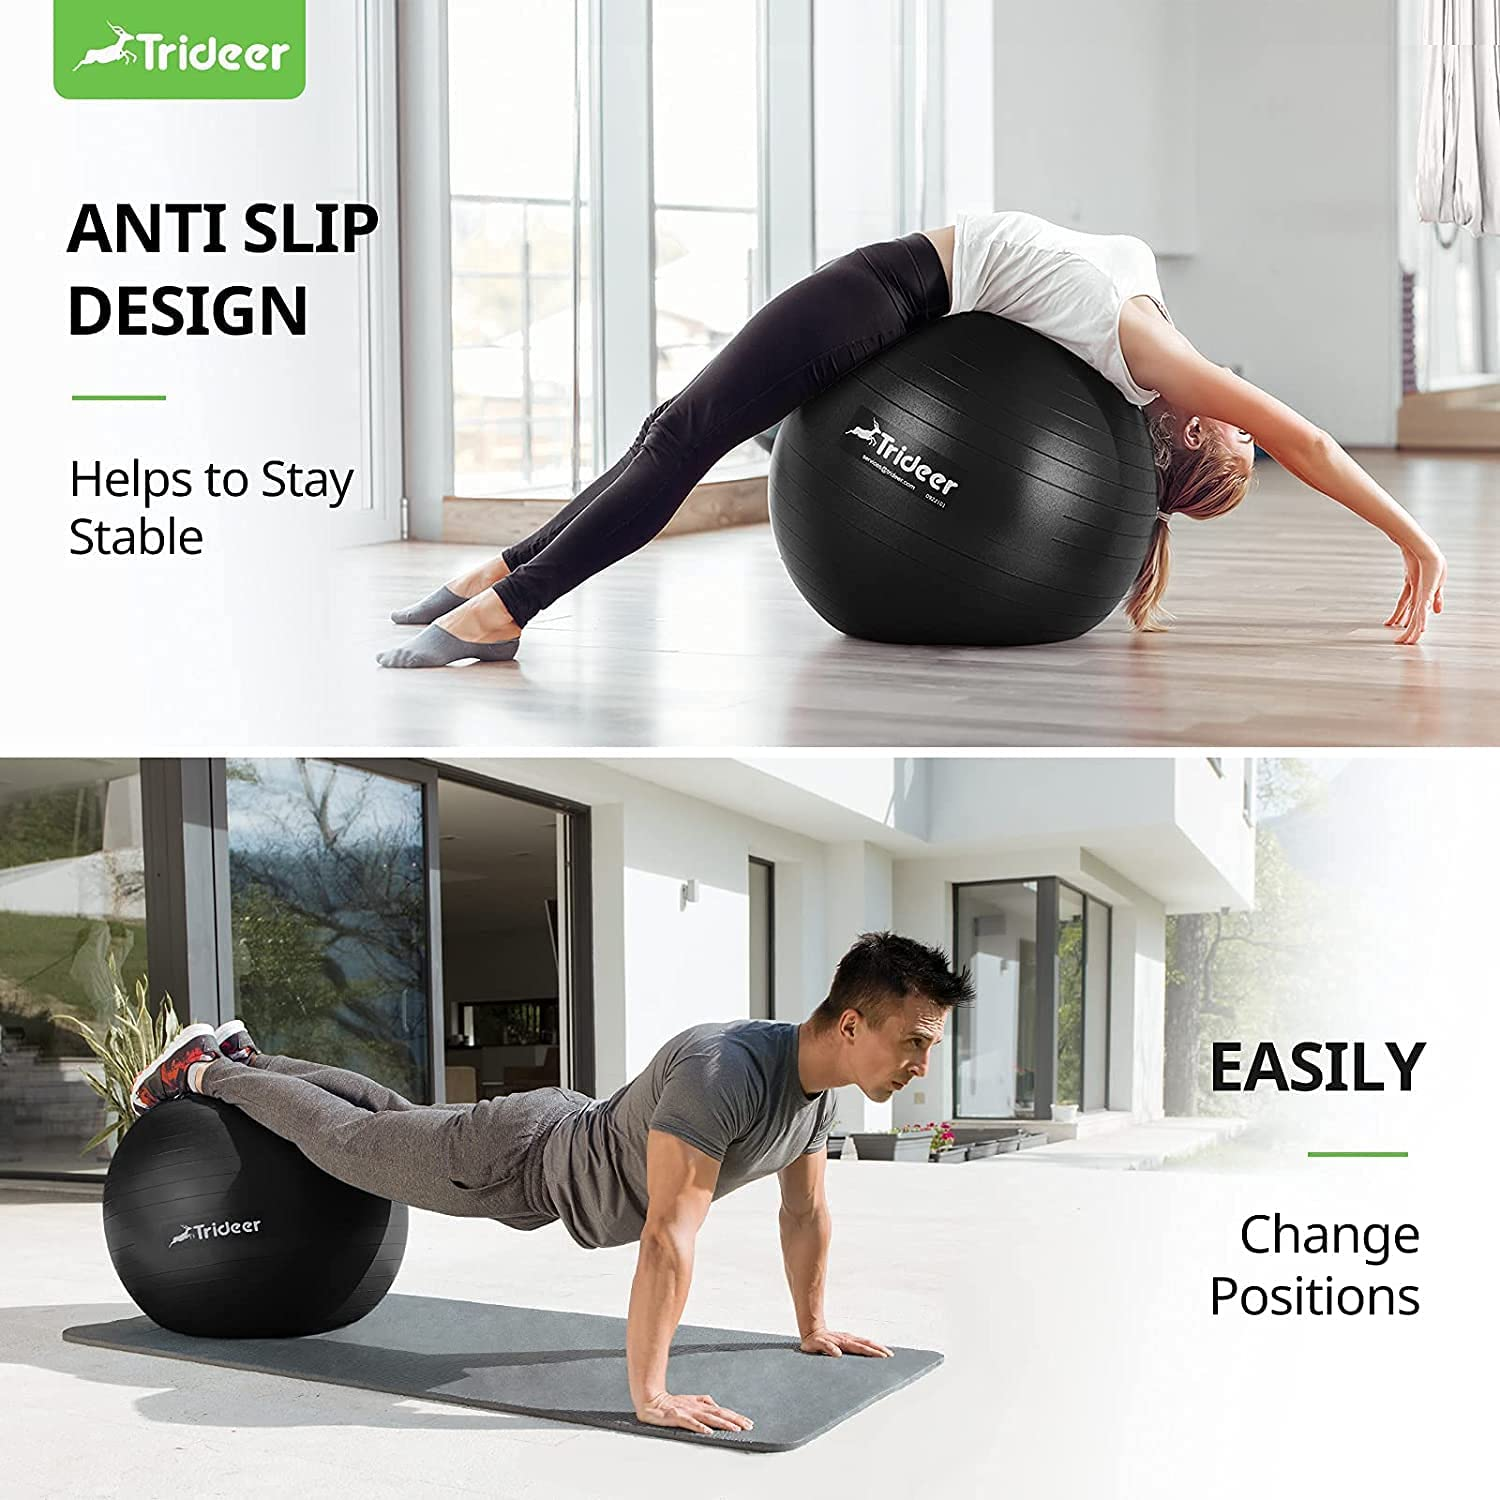 Yoga Ball Exercise Ball, 5 Sizes Ball Chair, Heavy Duty Swiss Ball for Balance, Stability, Pregnancy and Physical Therapy, Quick Pump Included